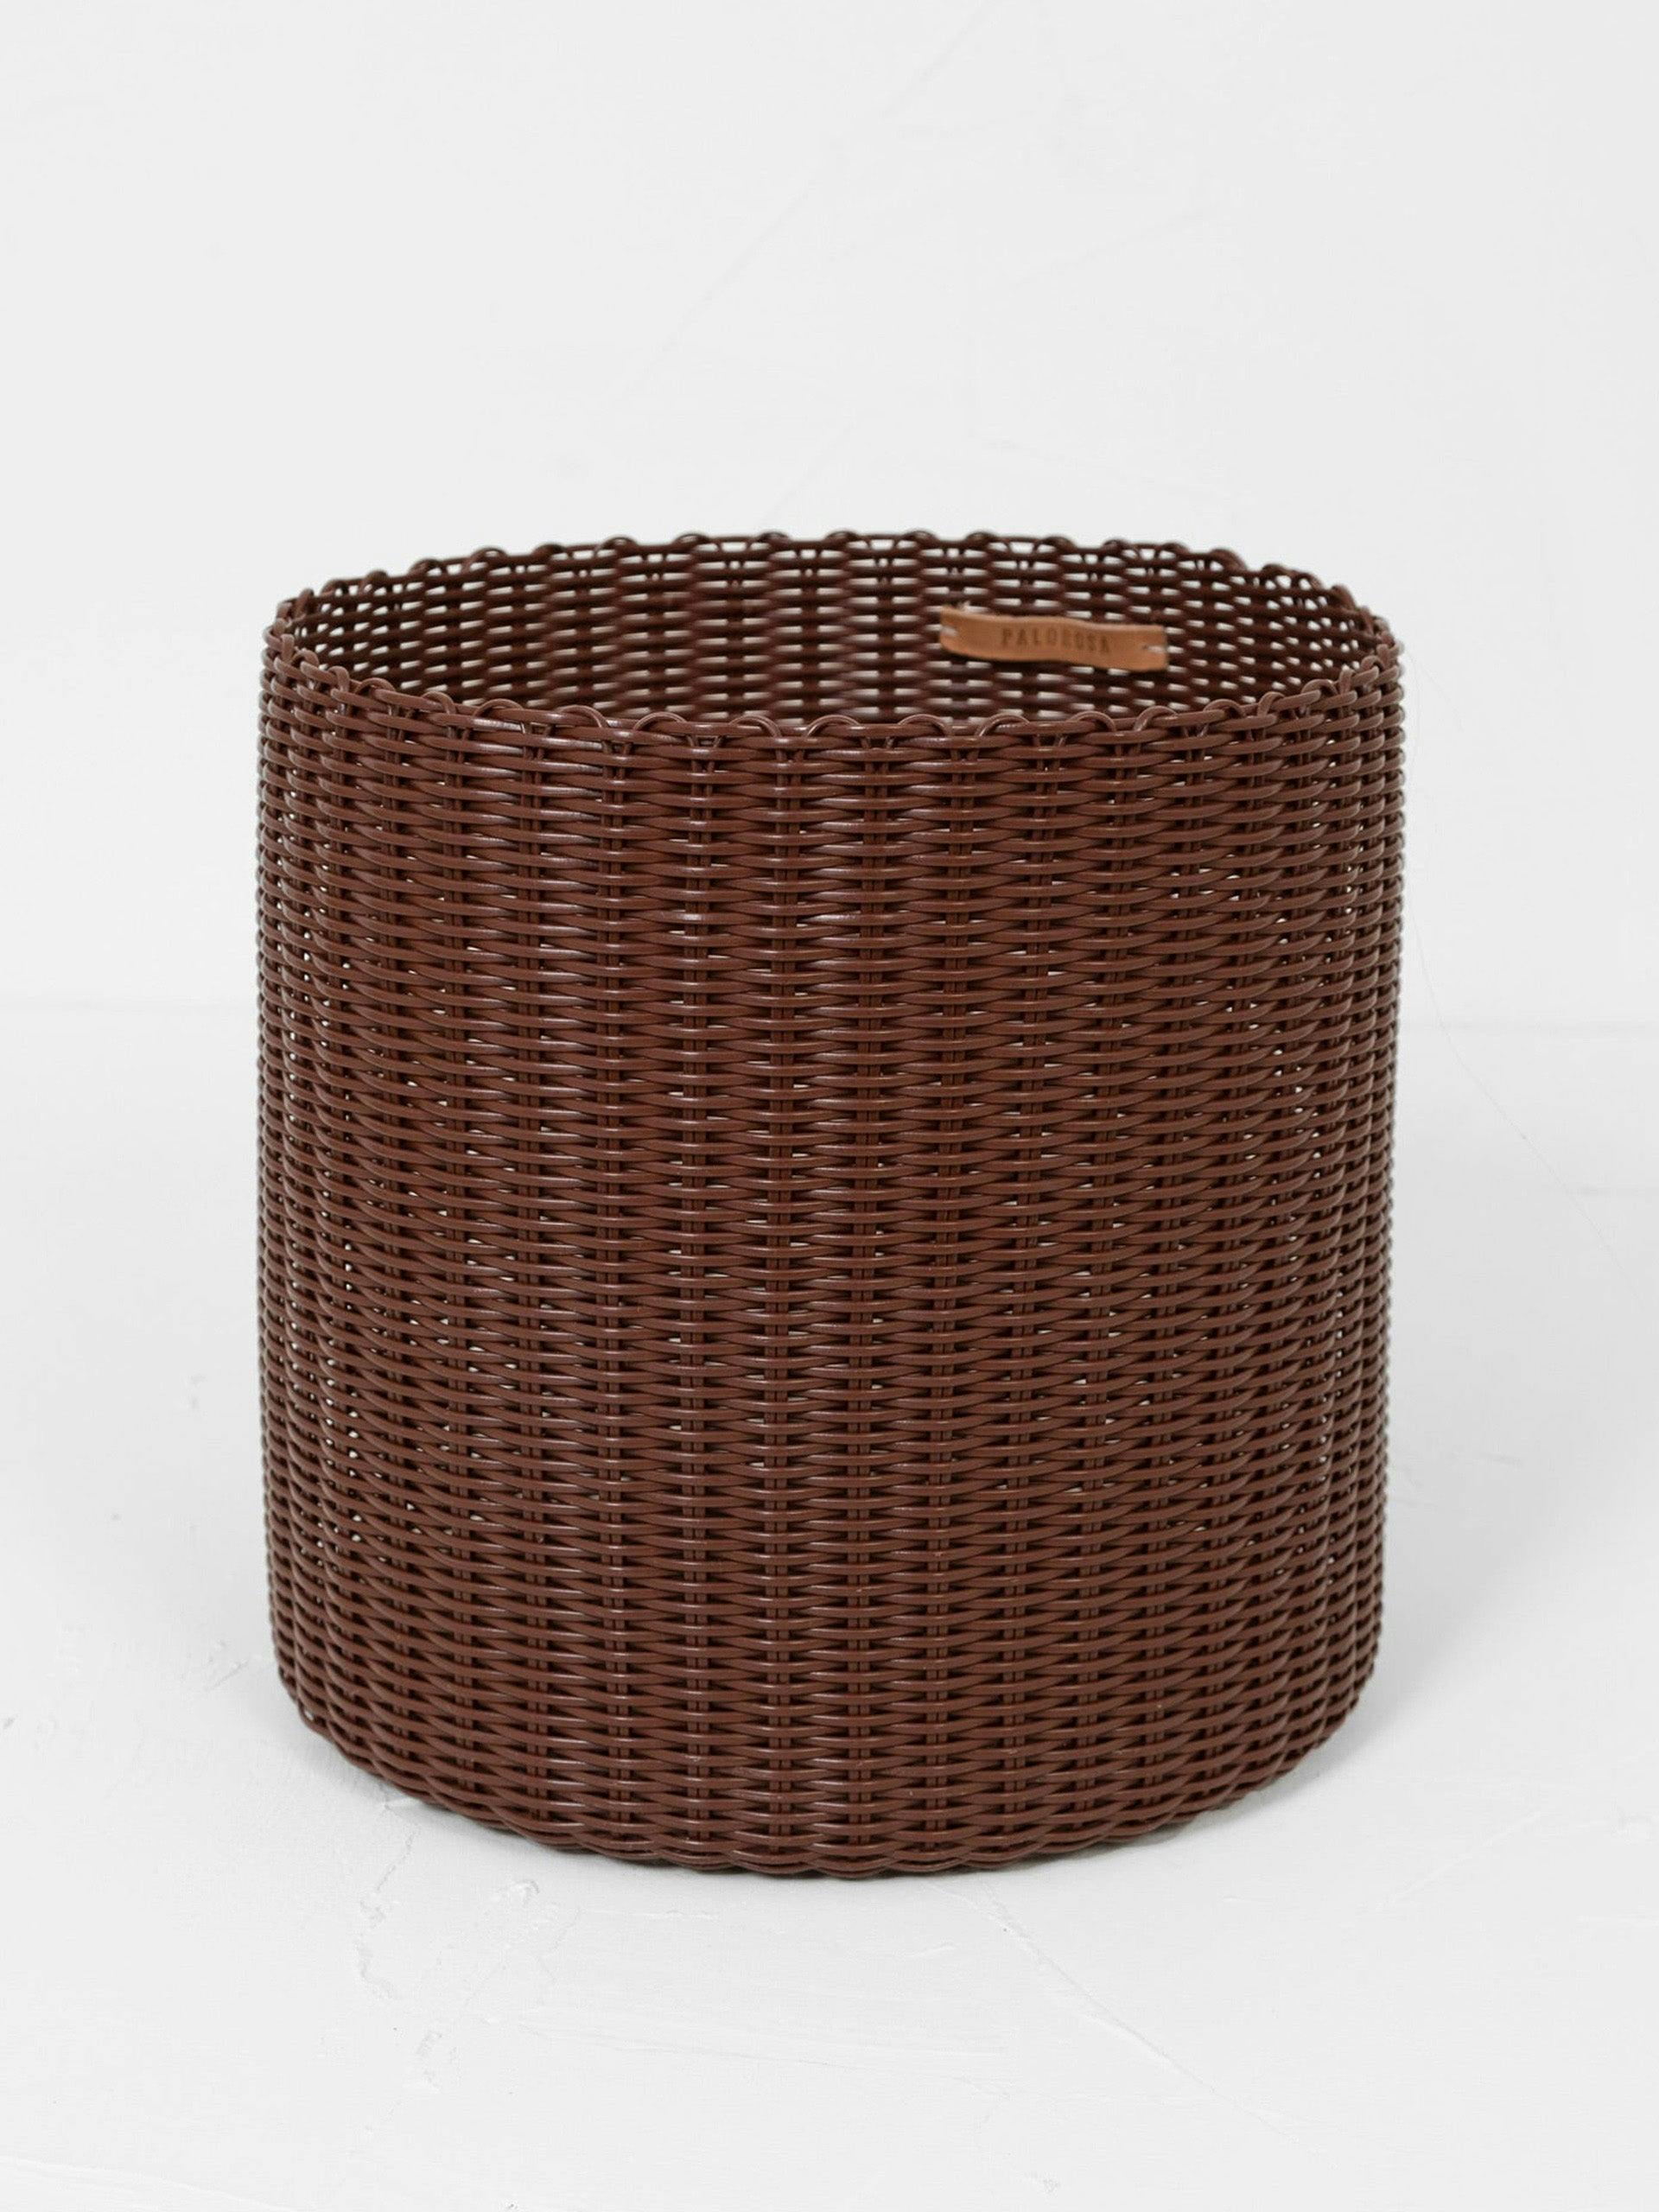 Small woven pot in chocolate